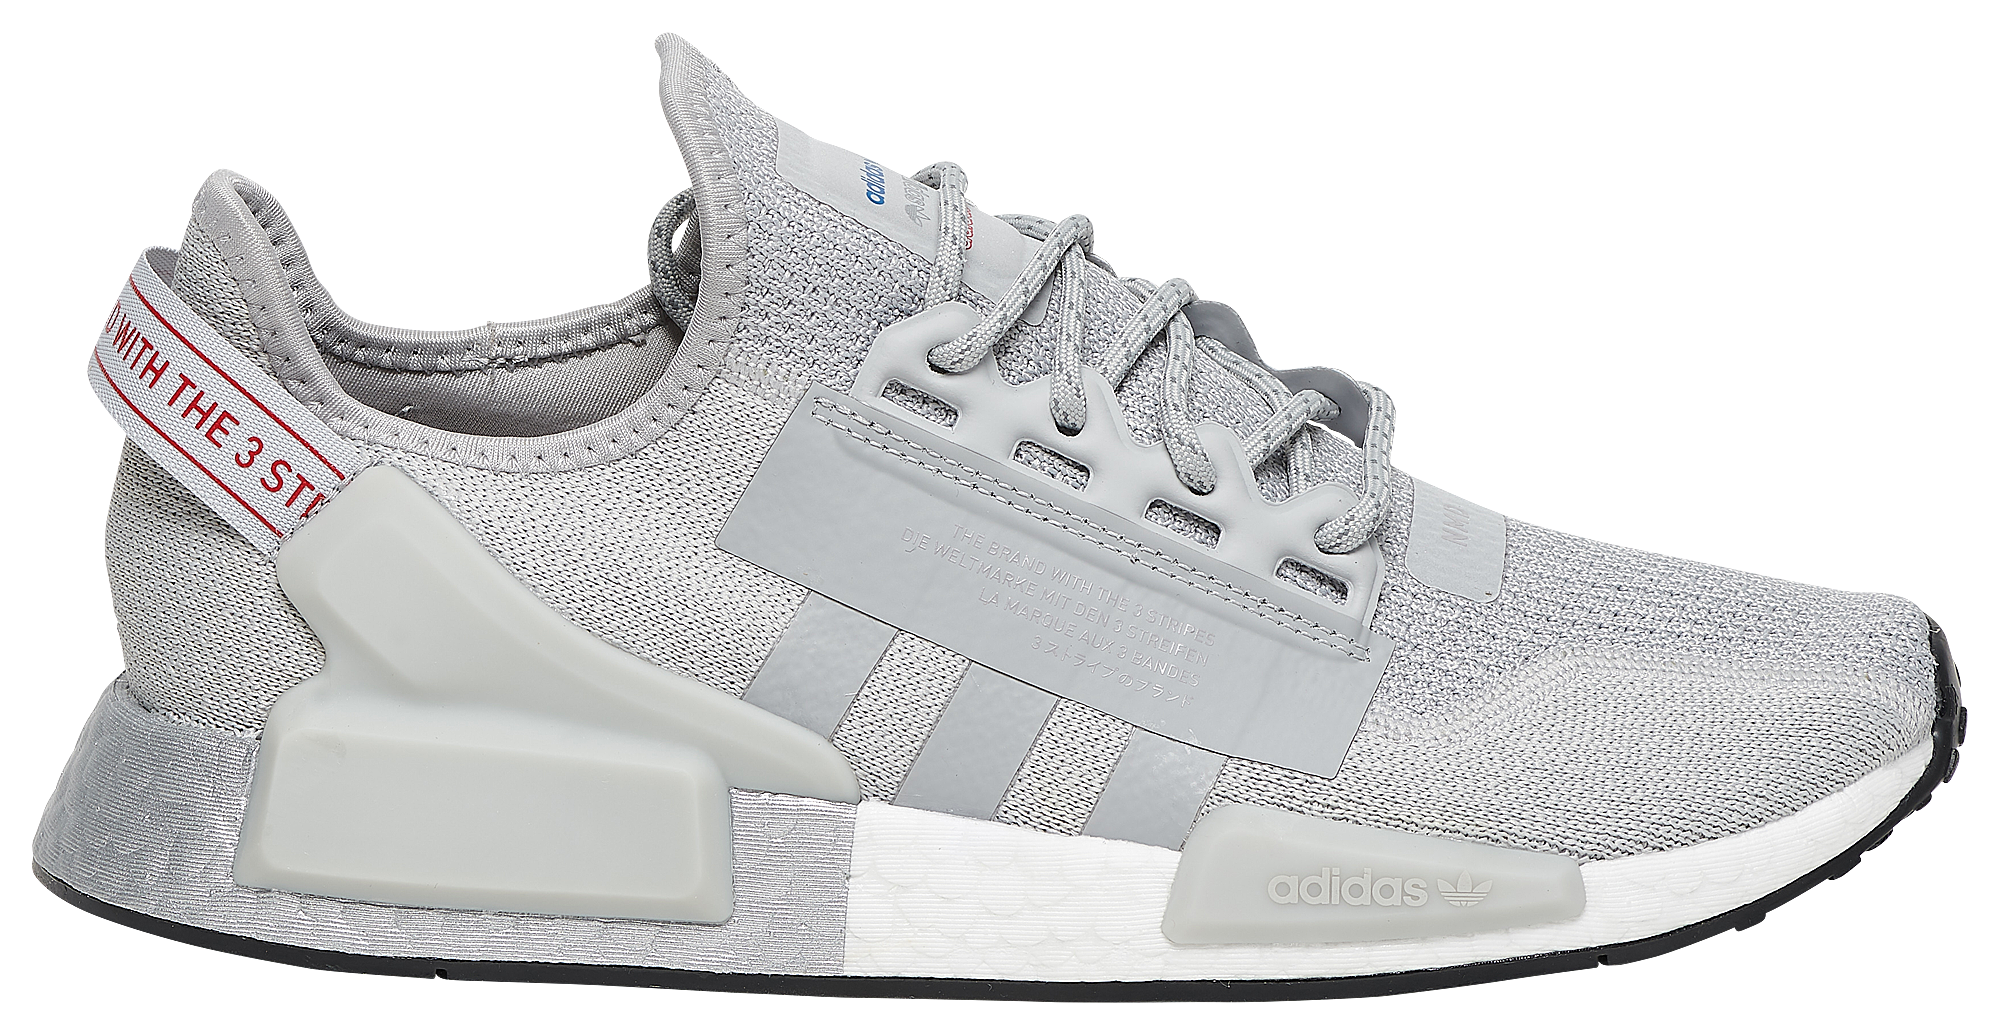 adidas NMD R1 shoes gray blue Stylefile